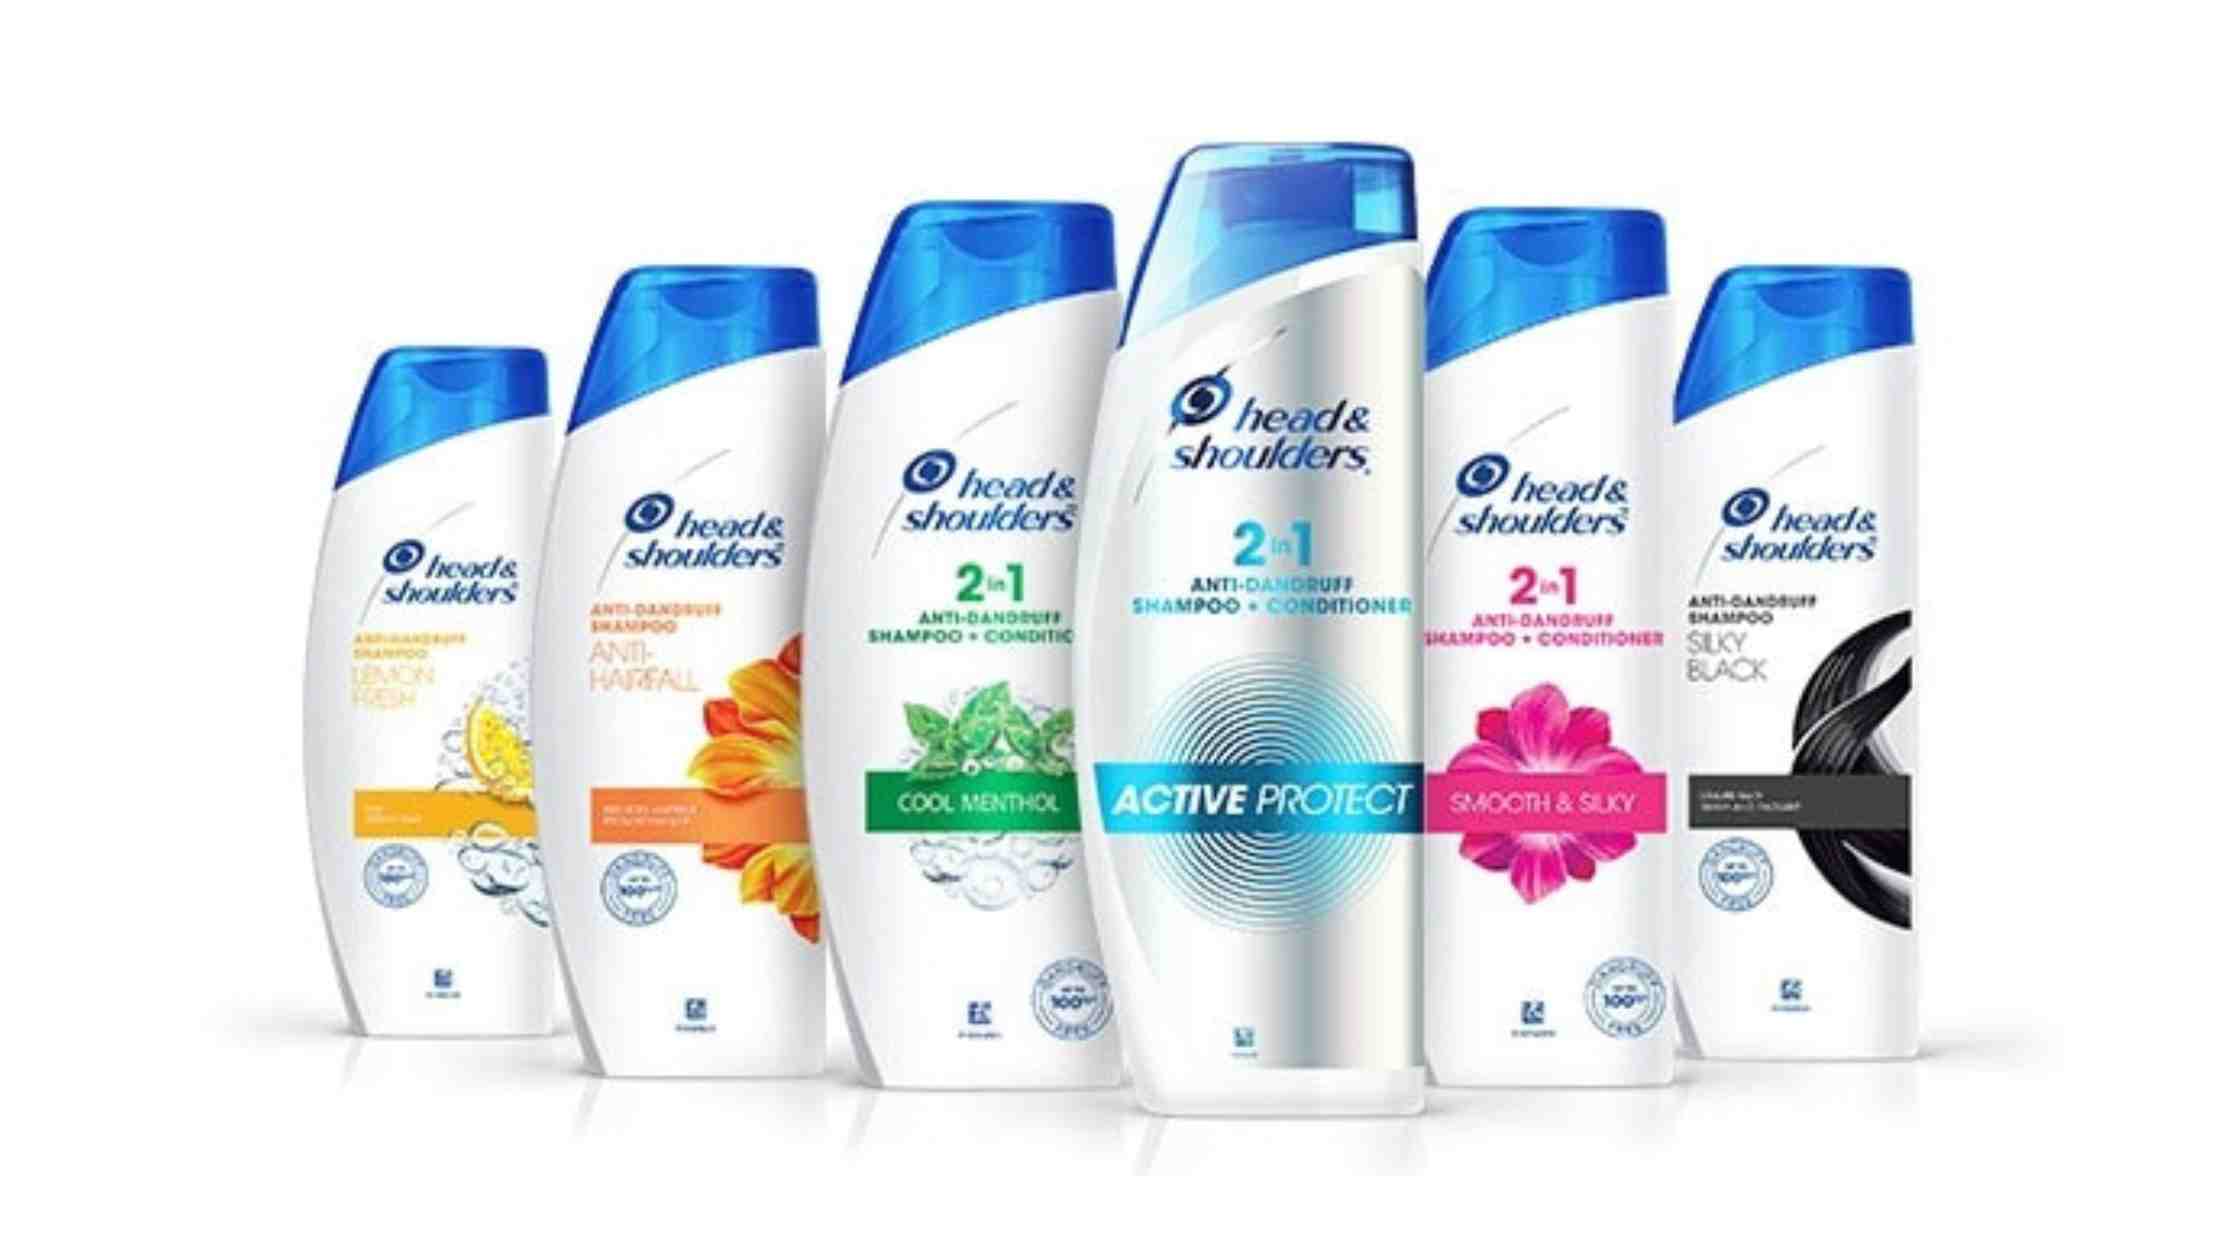 Is Head and Shoulders clinical strength shampoo discontinued?